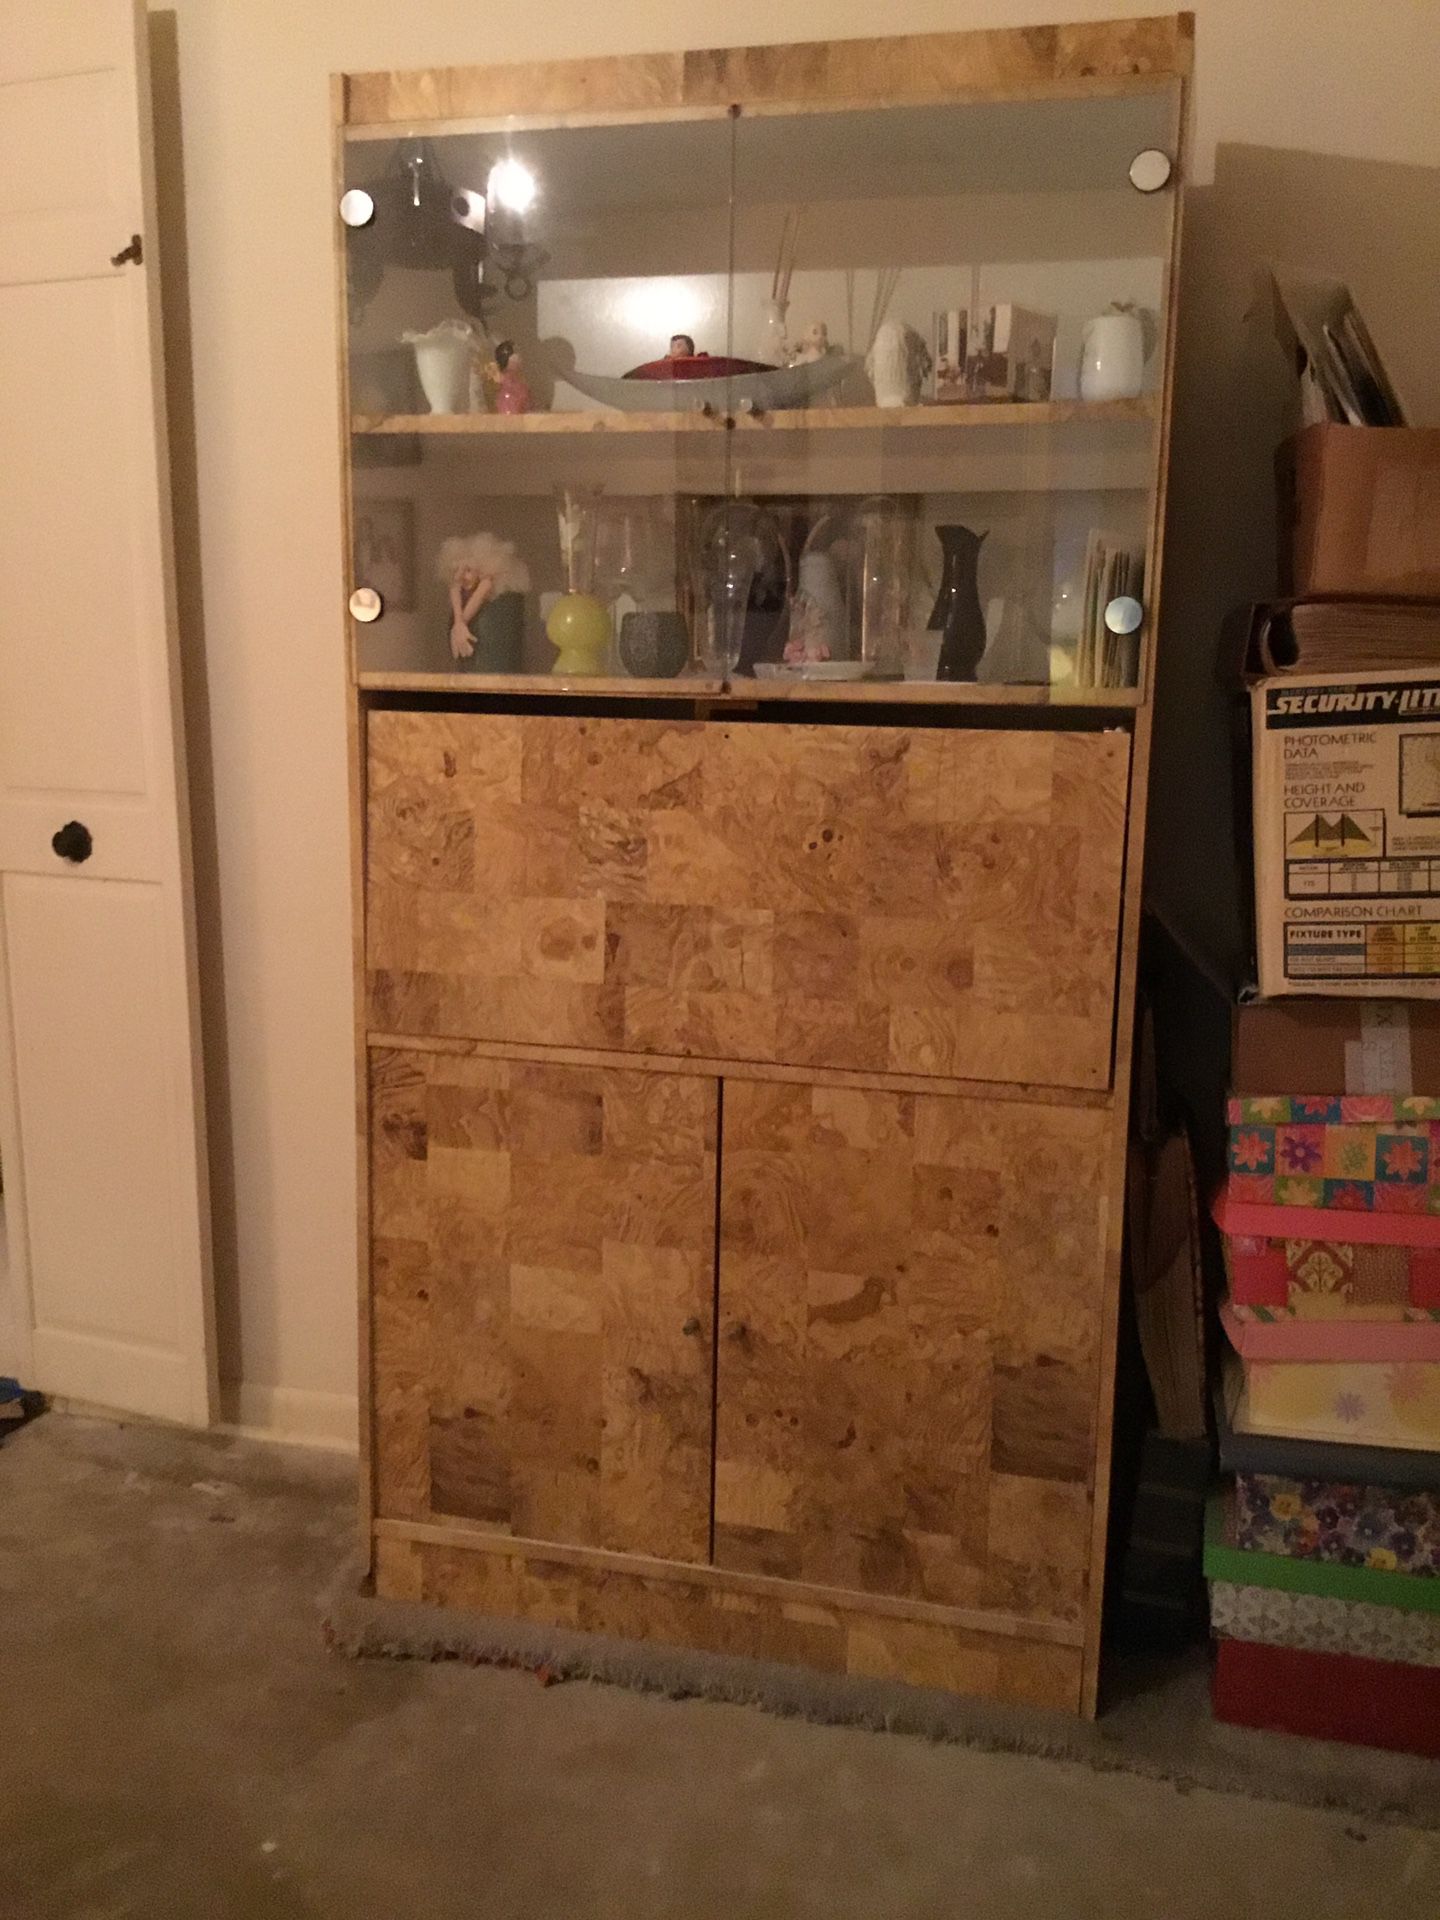 China Or Display Cabinet With Storage - Formica Exterior With Glass Display In Upper Area And Cabinet With Shelves Below- Approx. 71 X 36